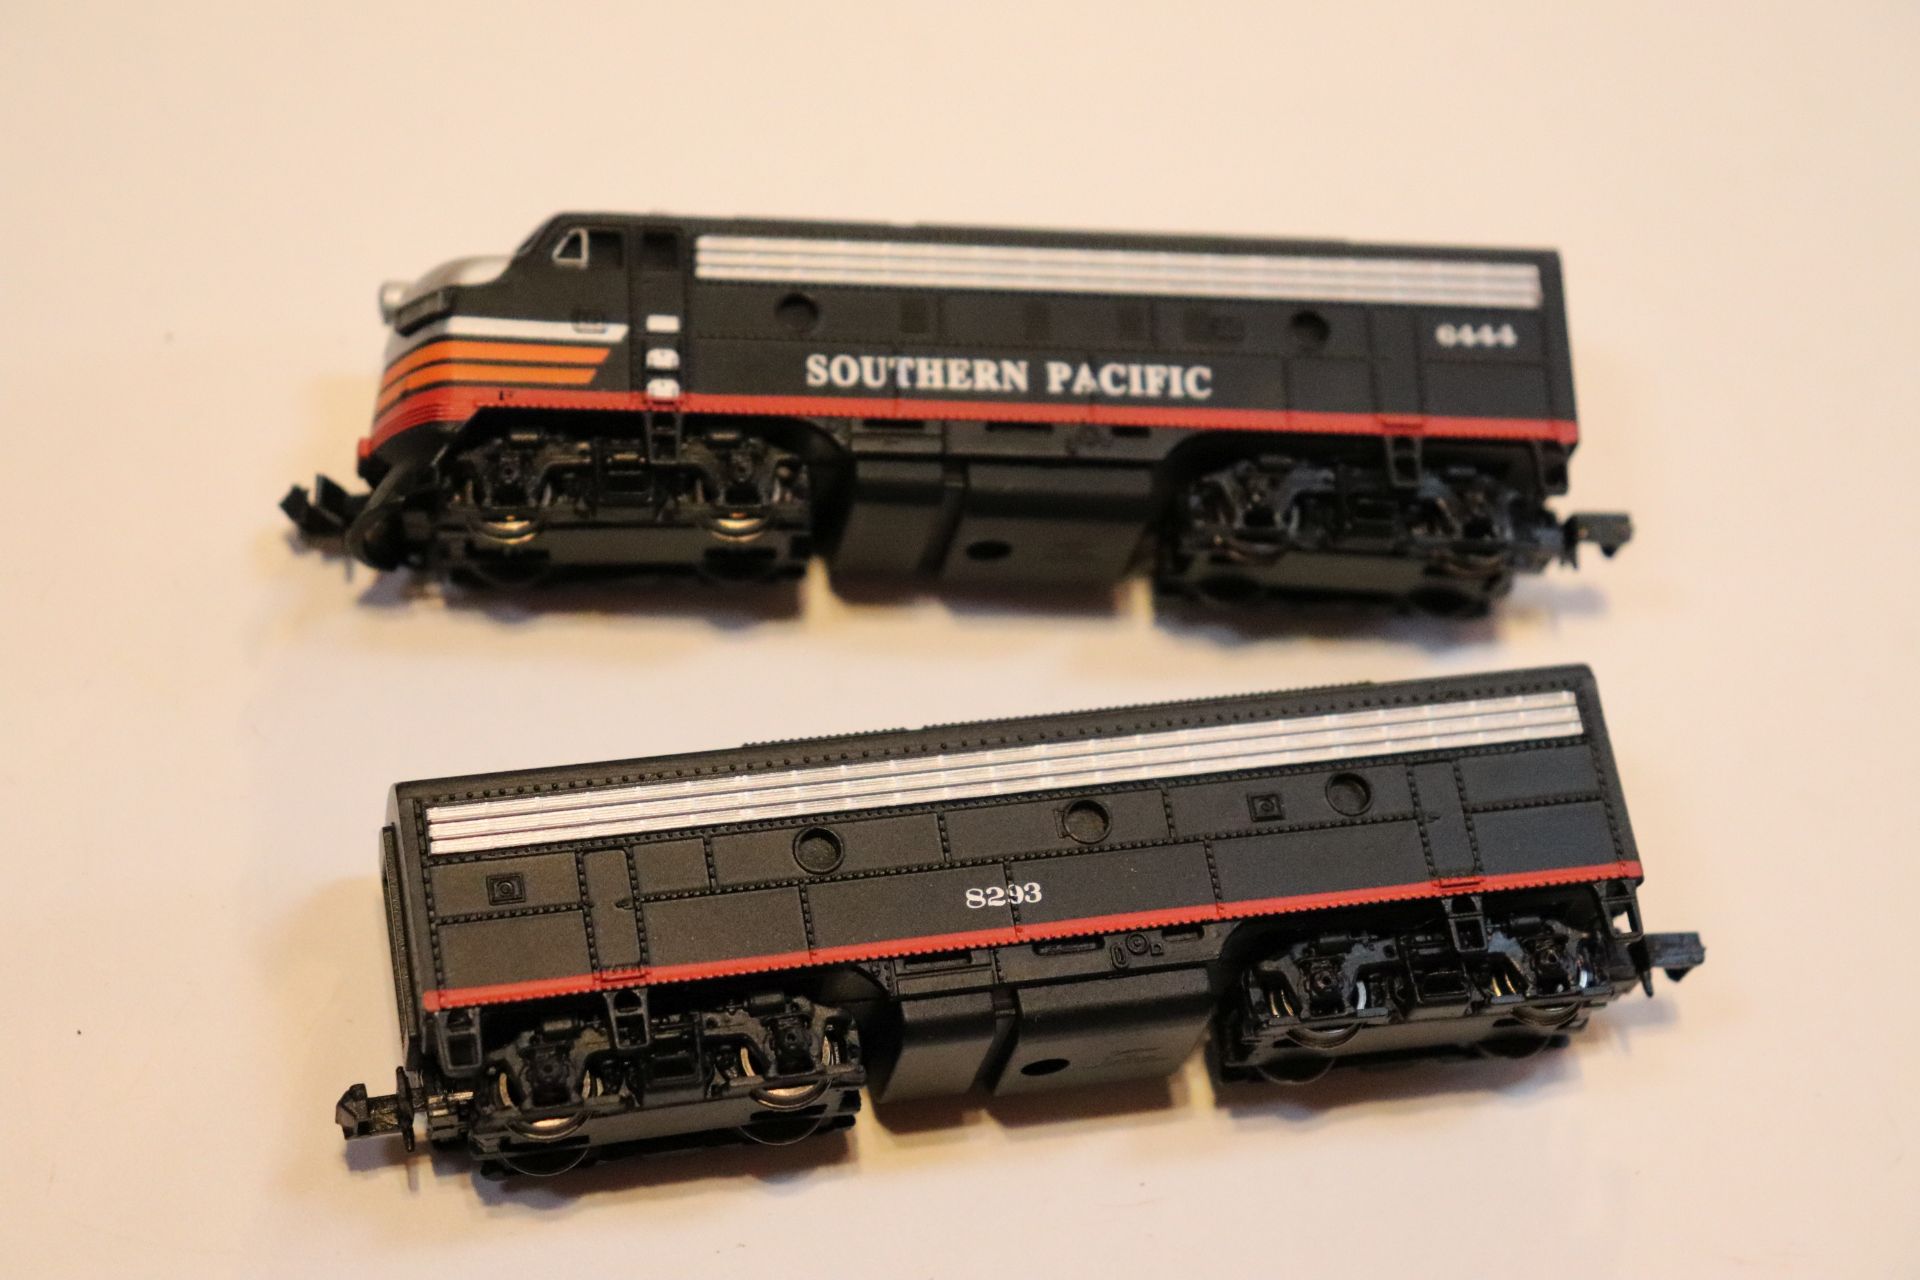 Bachmann locomotive, Southern Pacific and train car, N scale